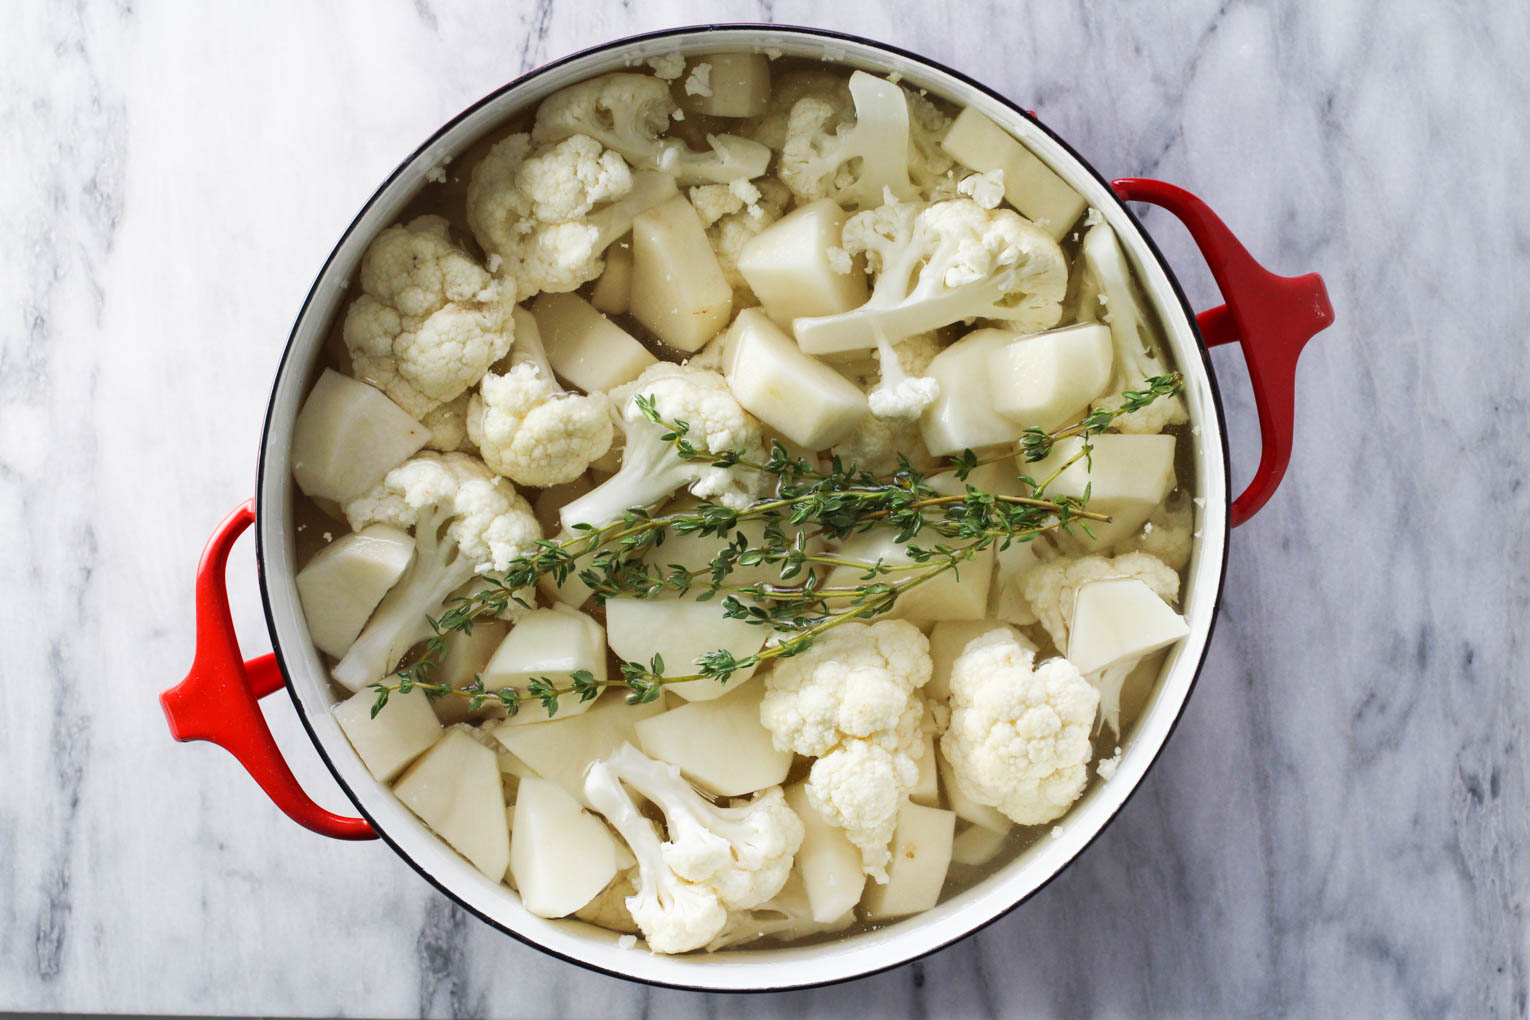 Potato chunks, cauliflower florets, and thyme sprig in a pot standing on marble background.